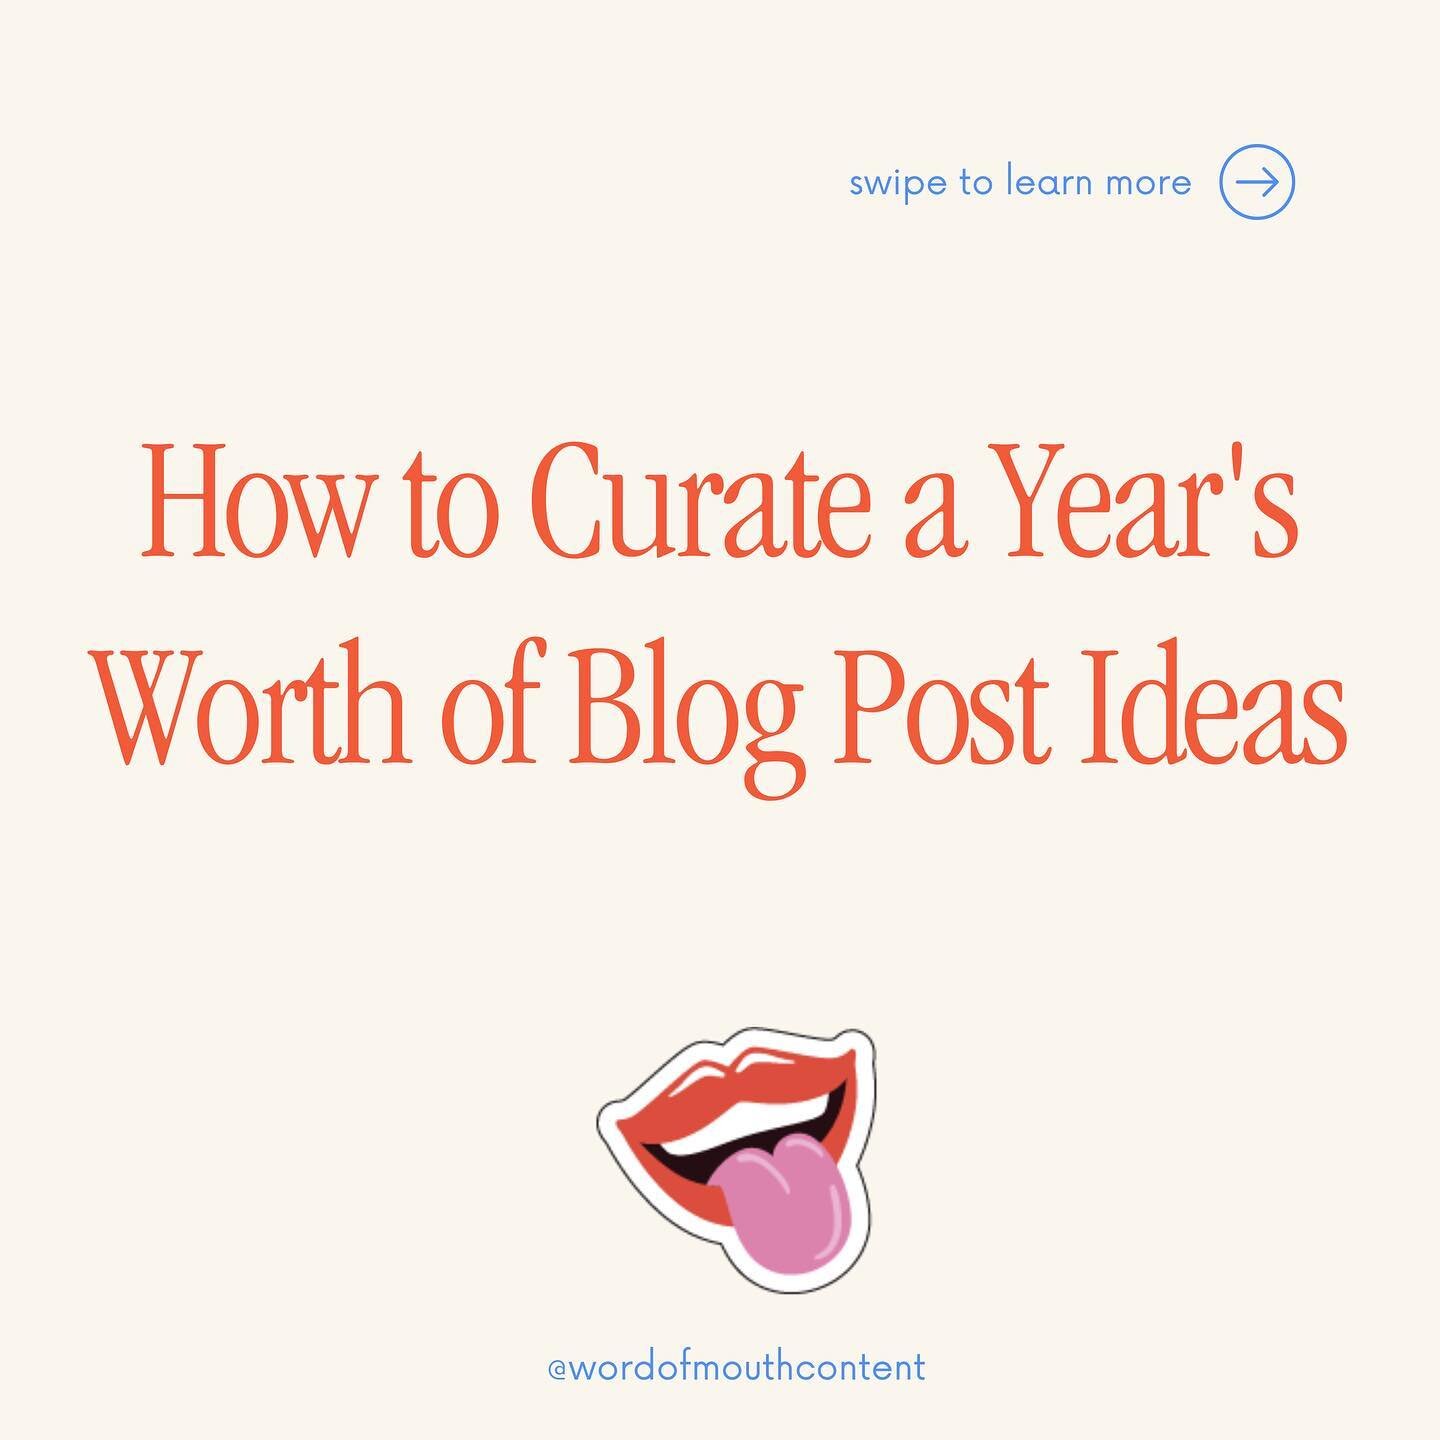 Happy Thanksgiving!

With the new year starting soon, grab this guide on how to curate a year&rsquo;s worth of blog post ideas. 

DM me for more info!

.
.
.
.
.
#seowriter #seotipsandtricks #seoblogger #seokeywordresearch #keywordresearchtools